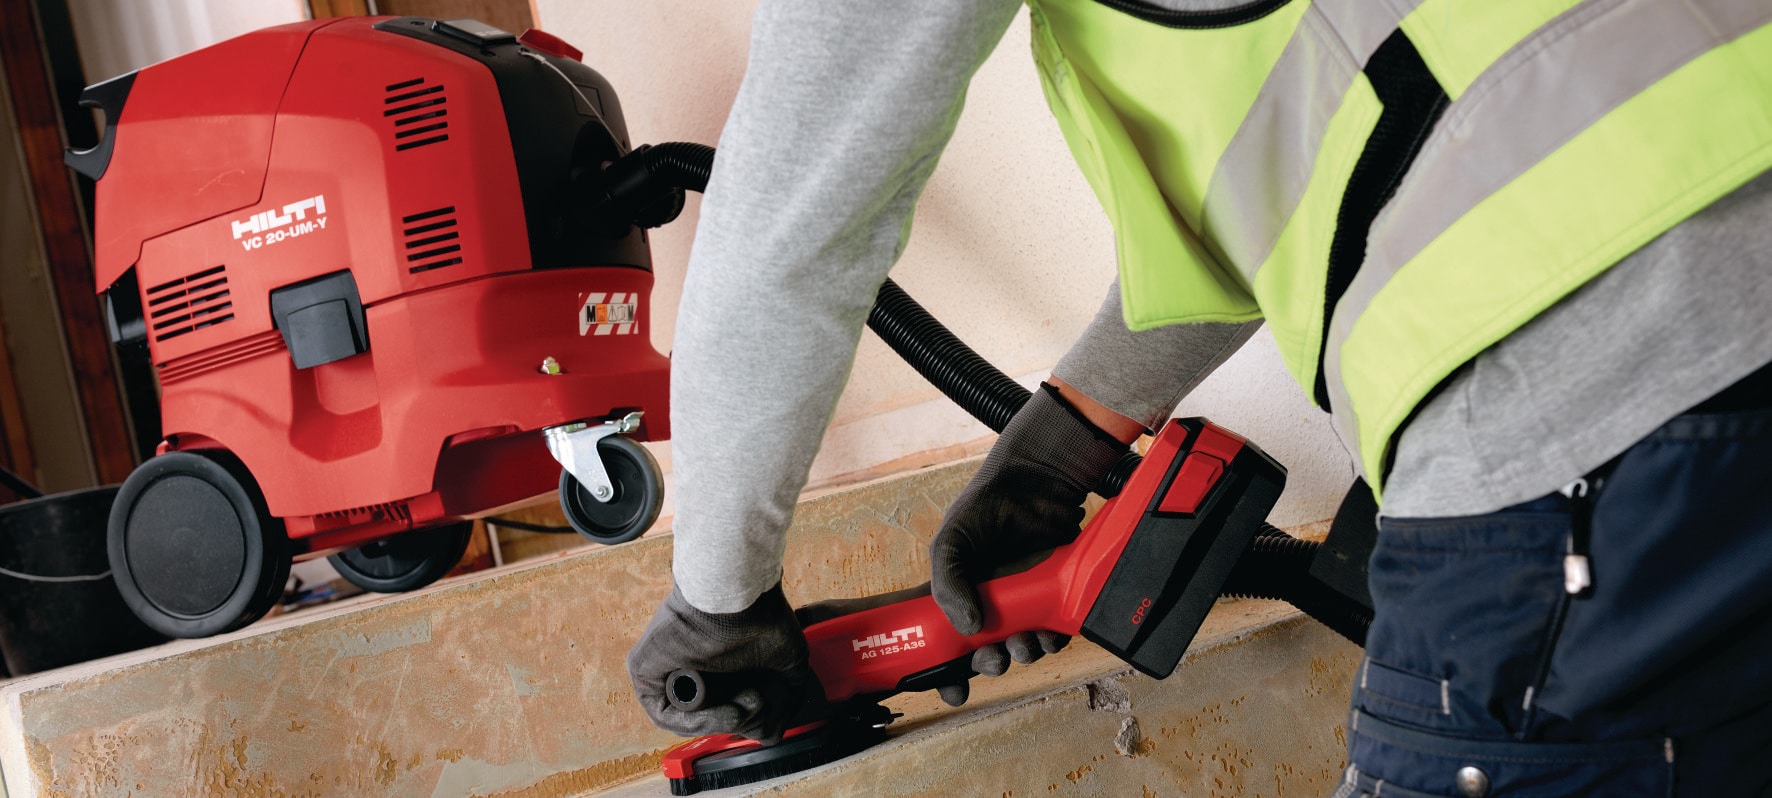 Hilti Hilti AG 600 A36 Cordless Brushless Angle Grinder 6" 36 Volt Lith-Ion Tool Only 